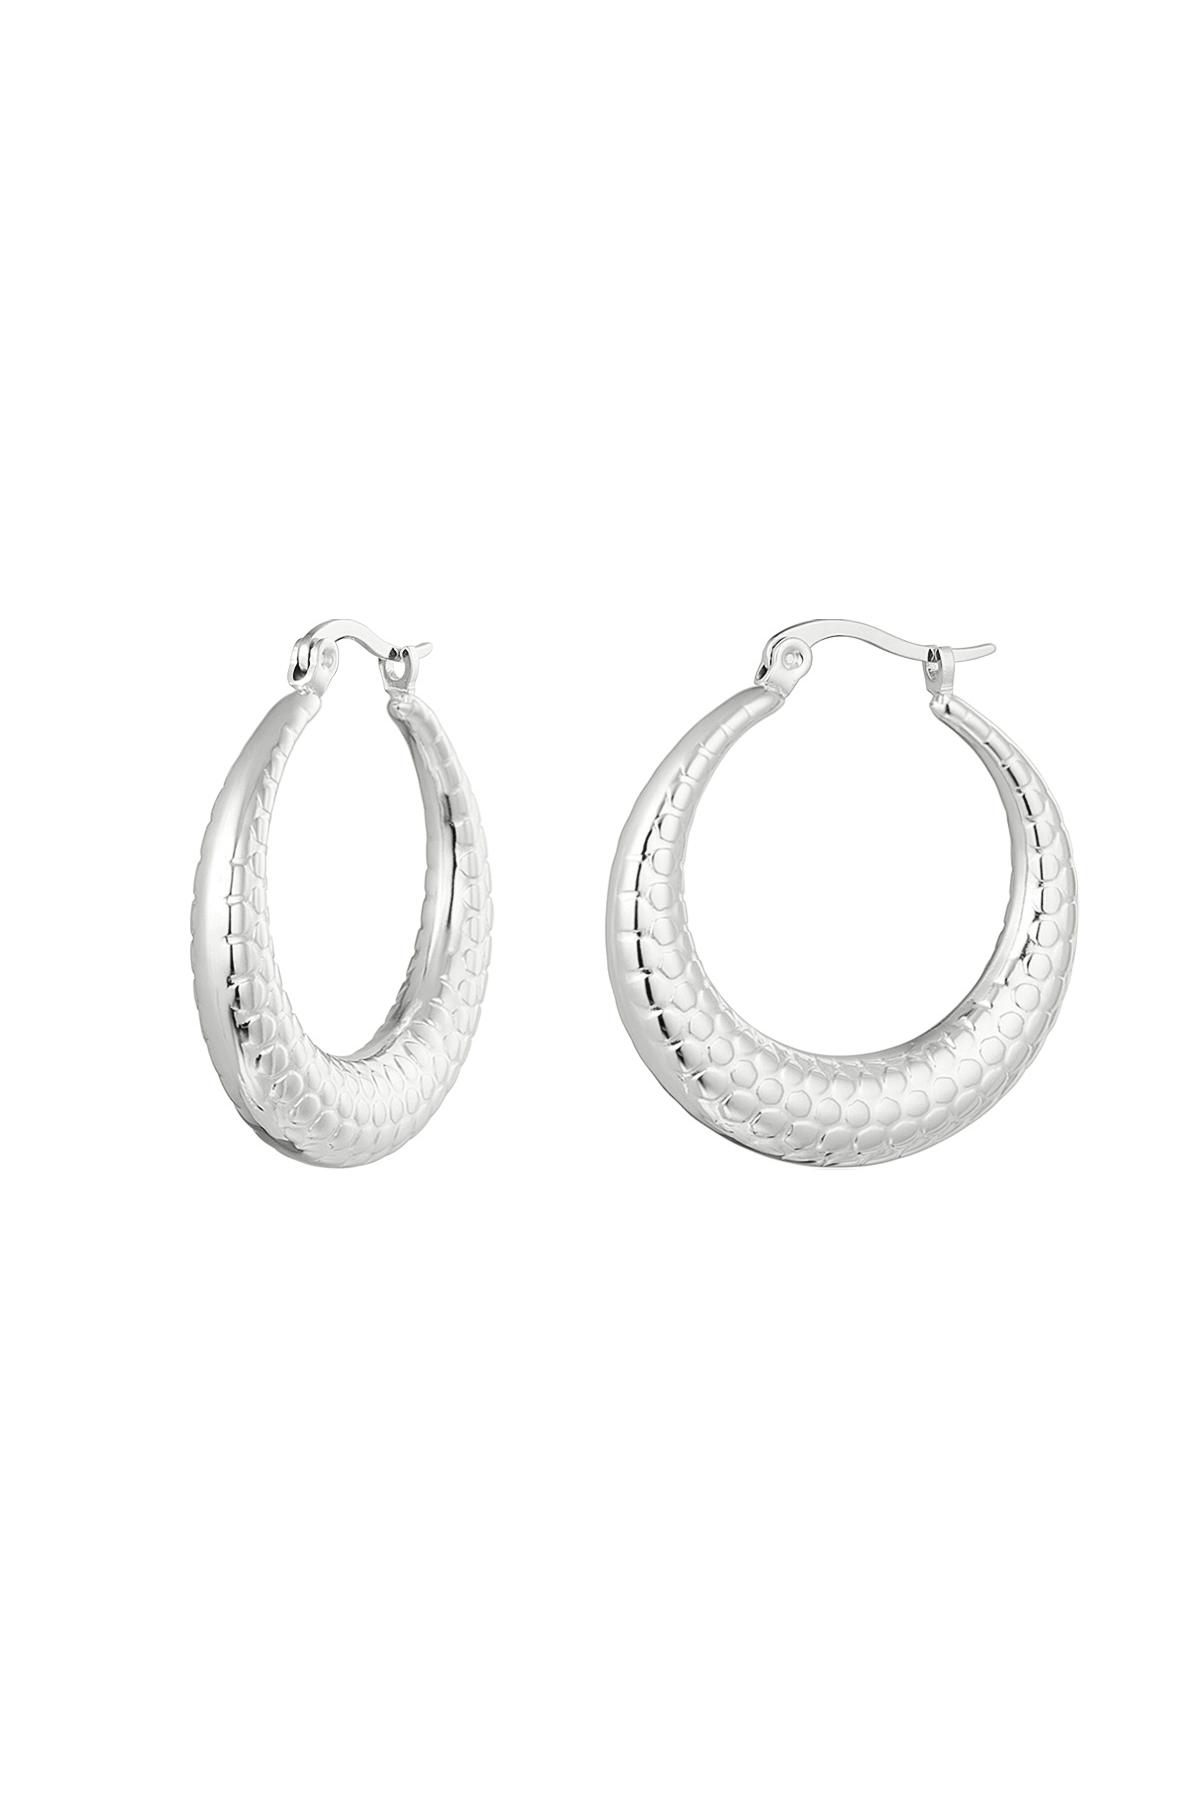 Earrings bubble print small Silver Stainless Steel 